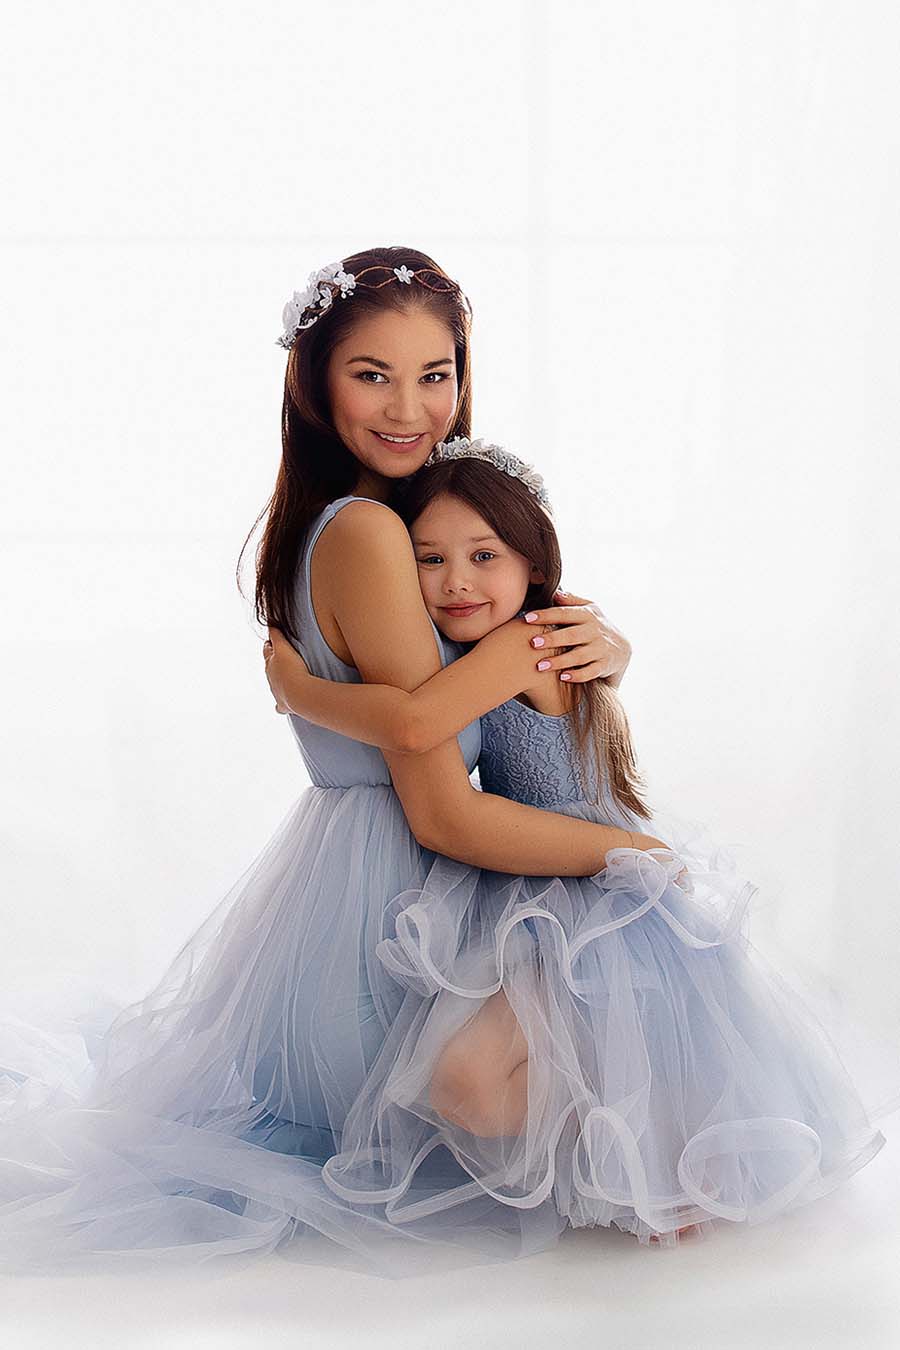 mother and daughter with matching light blue outfits are holding each other during a photo shoot. the dresses have no sleeves and skirts made of tulle. they have both a matching head band.